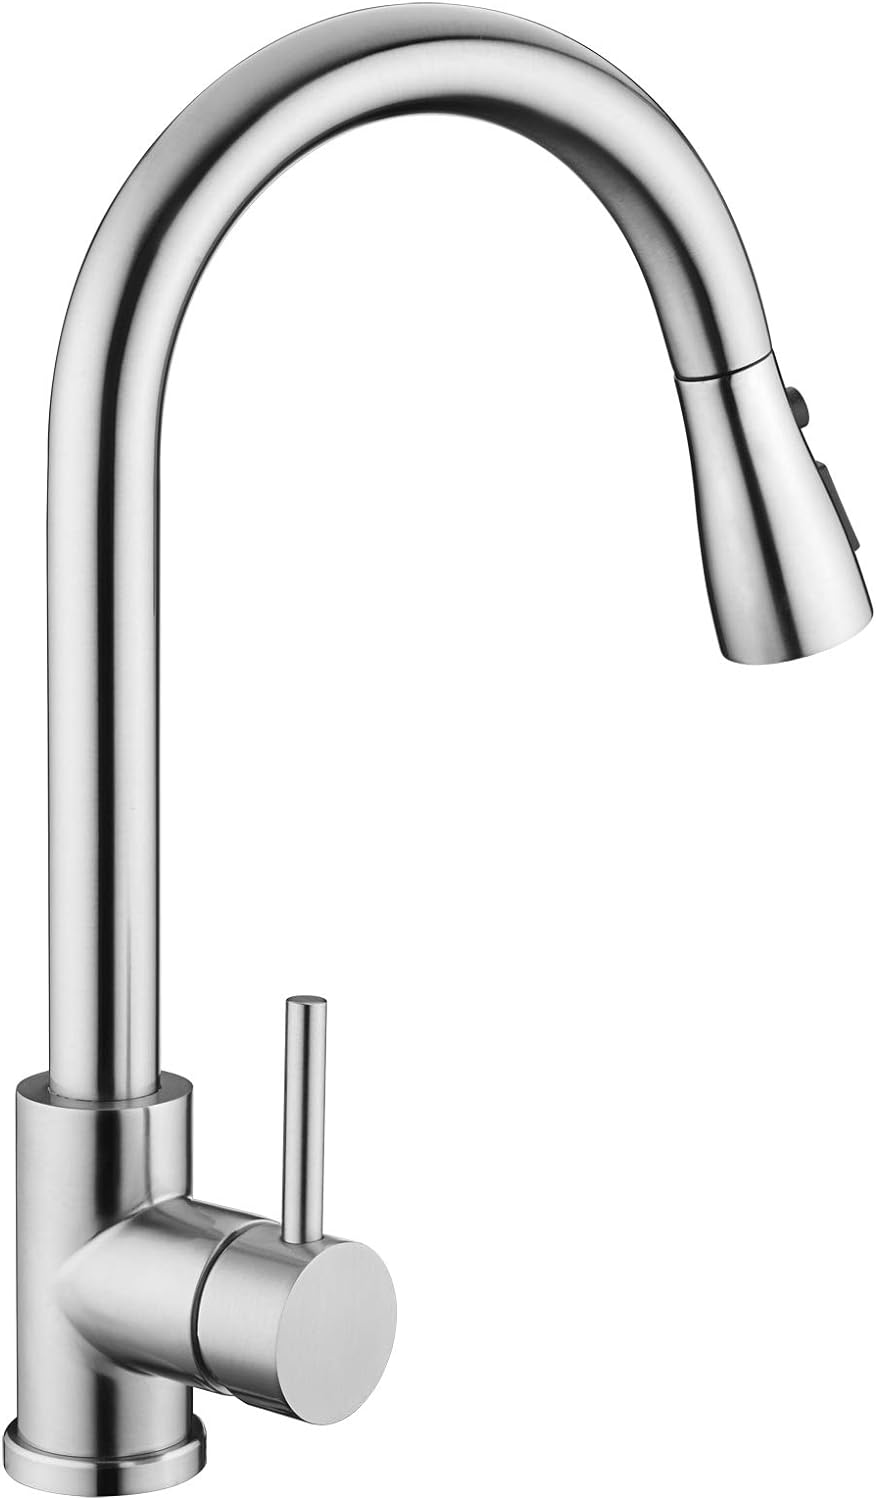 Whisper08 Kitchen Sink Faucet, Kitchen Faucet Stainless Steel with Pull Down Sprayer Brushed Nickel Commercial Modern High arc Single Han